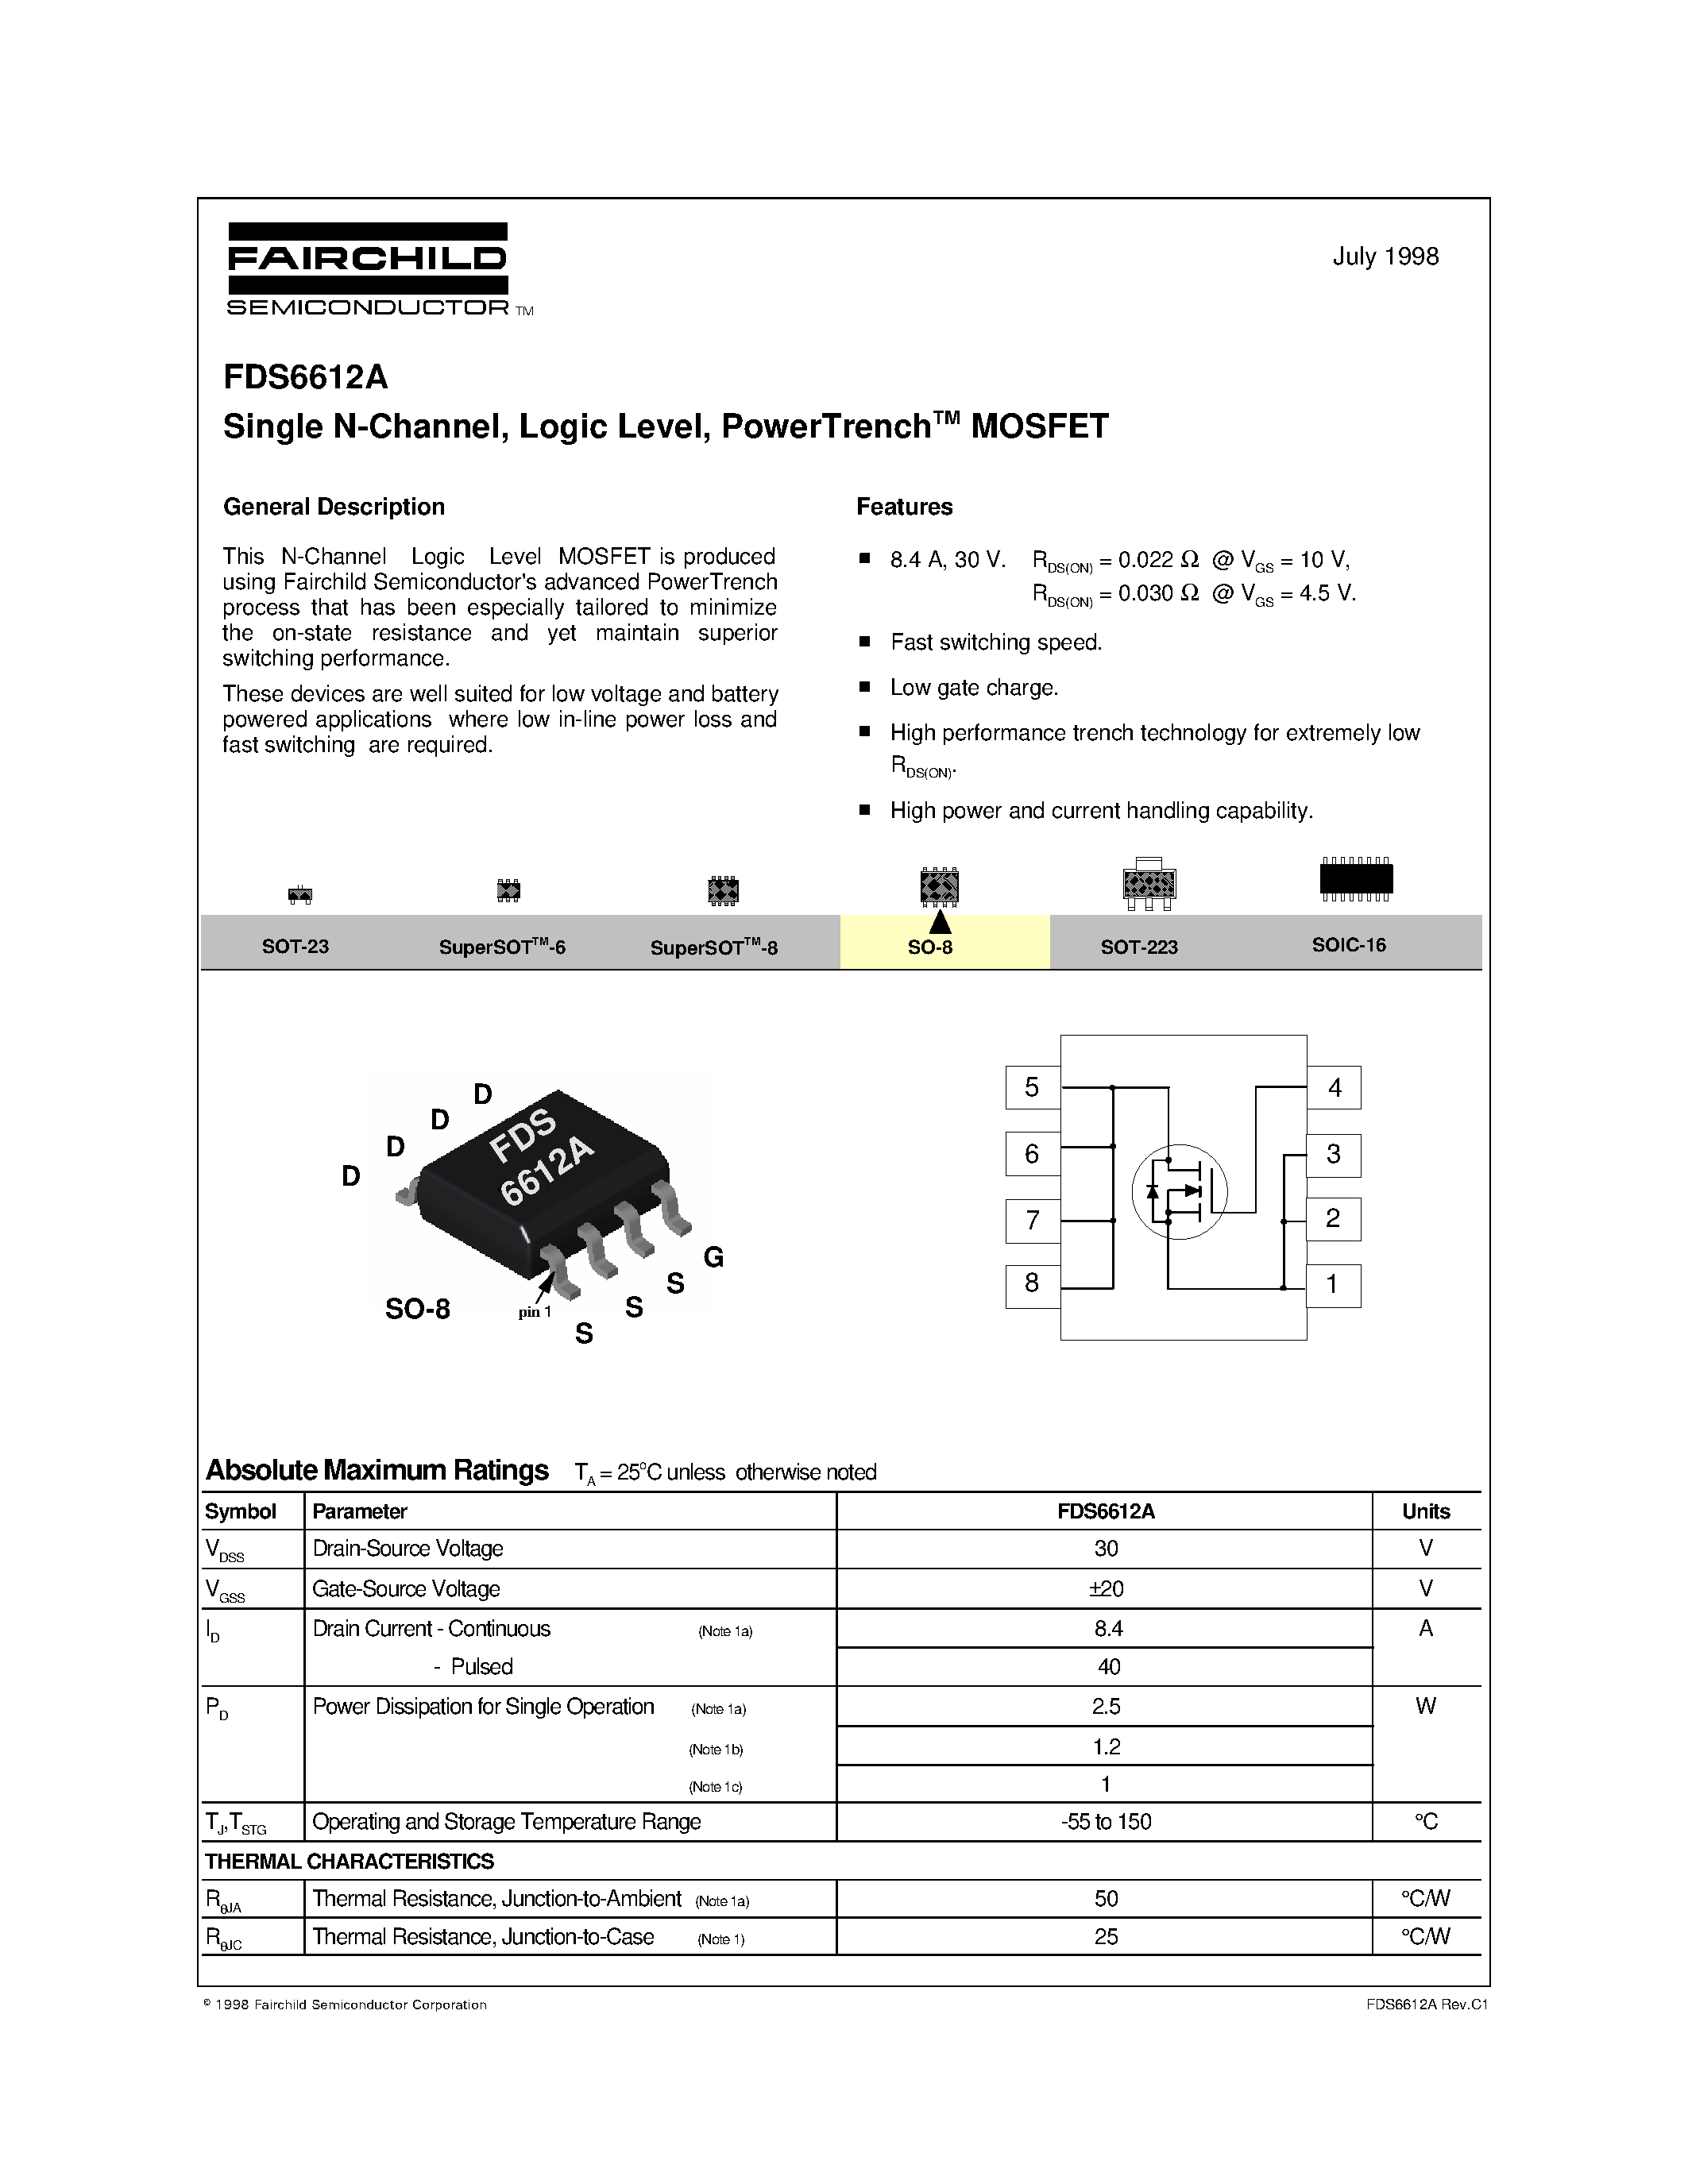 Даташит FDS6612A - Single N-Channel/ Logic Level/ PowerTrenchTM MOSFET страница 1